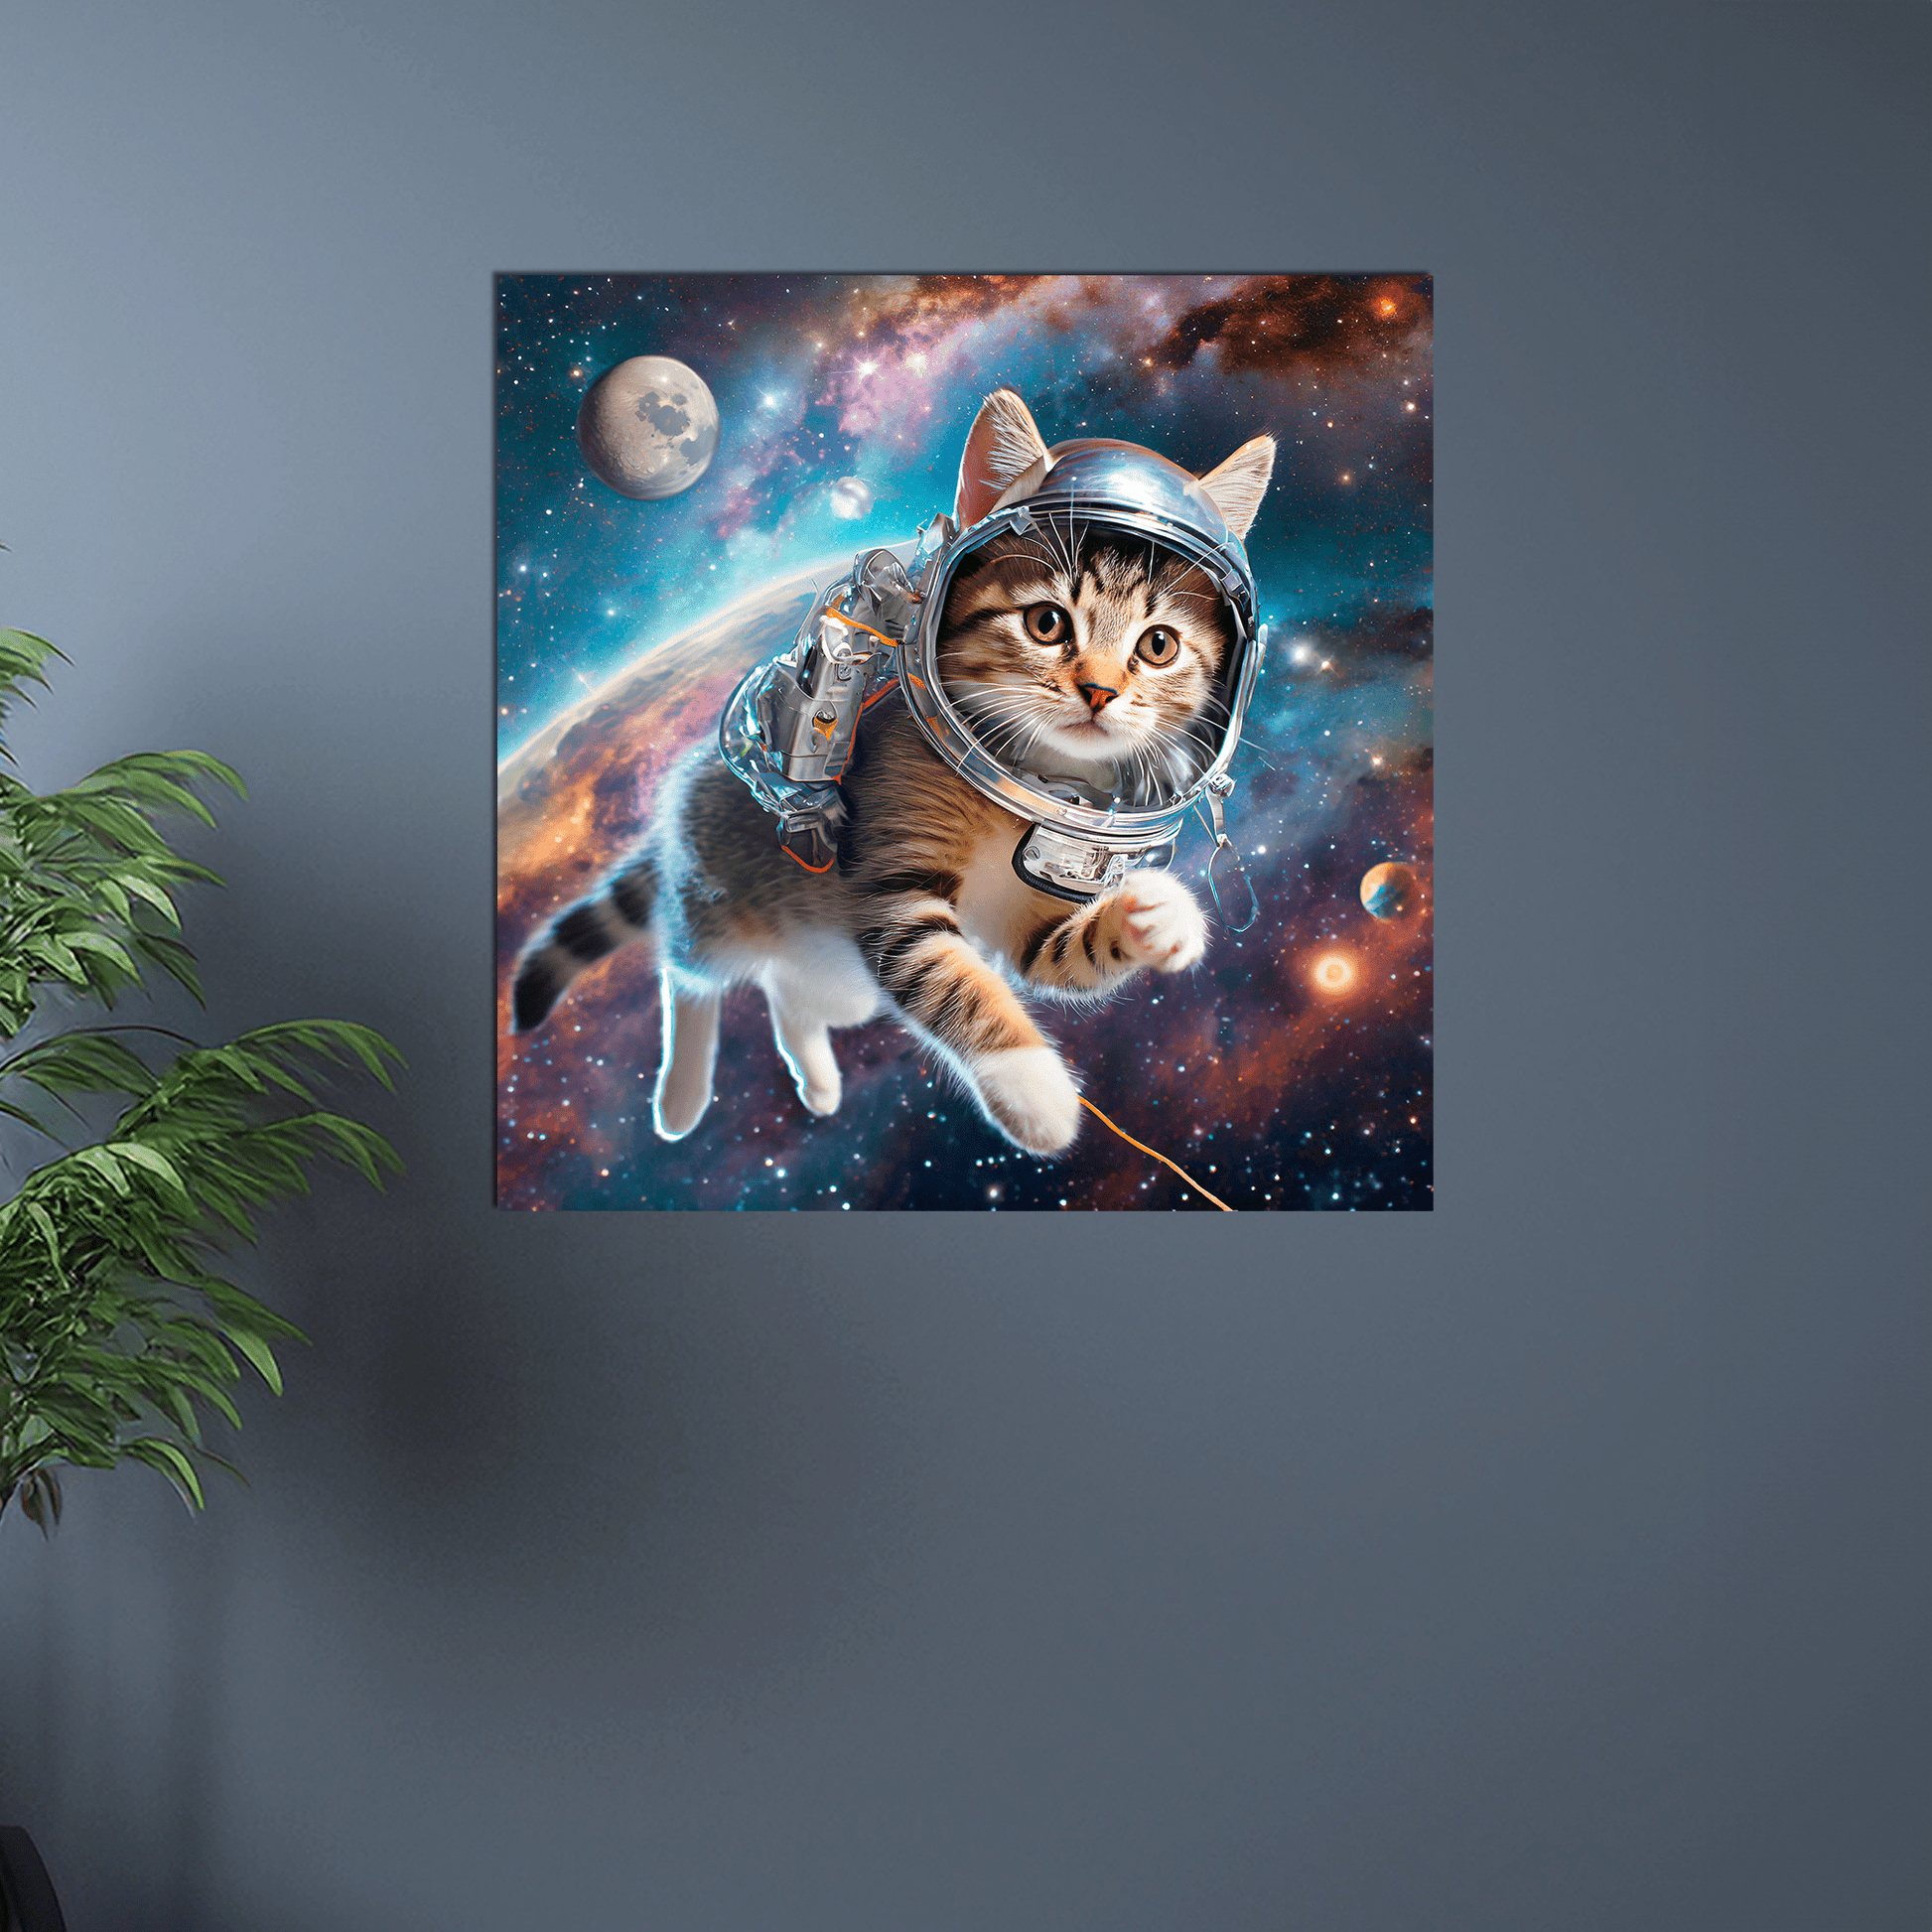 Space Kitty Chasing Cosmic String - Canvas Wrap - Premium Canvas Print